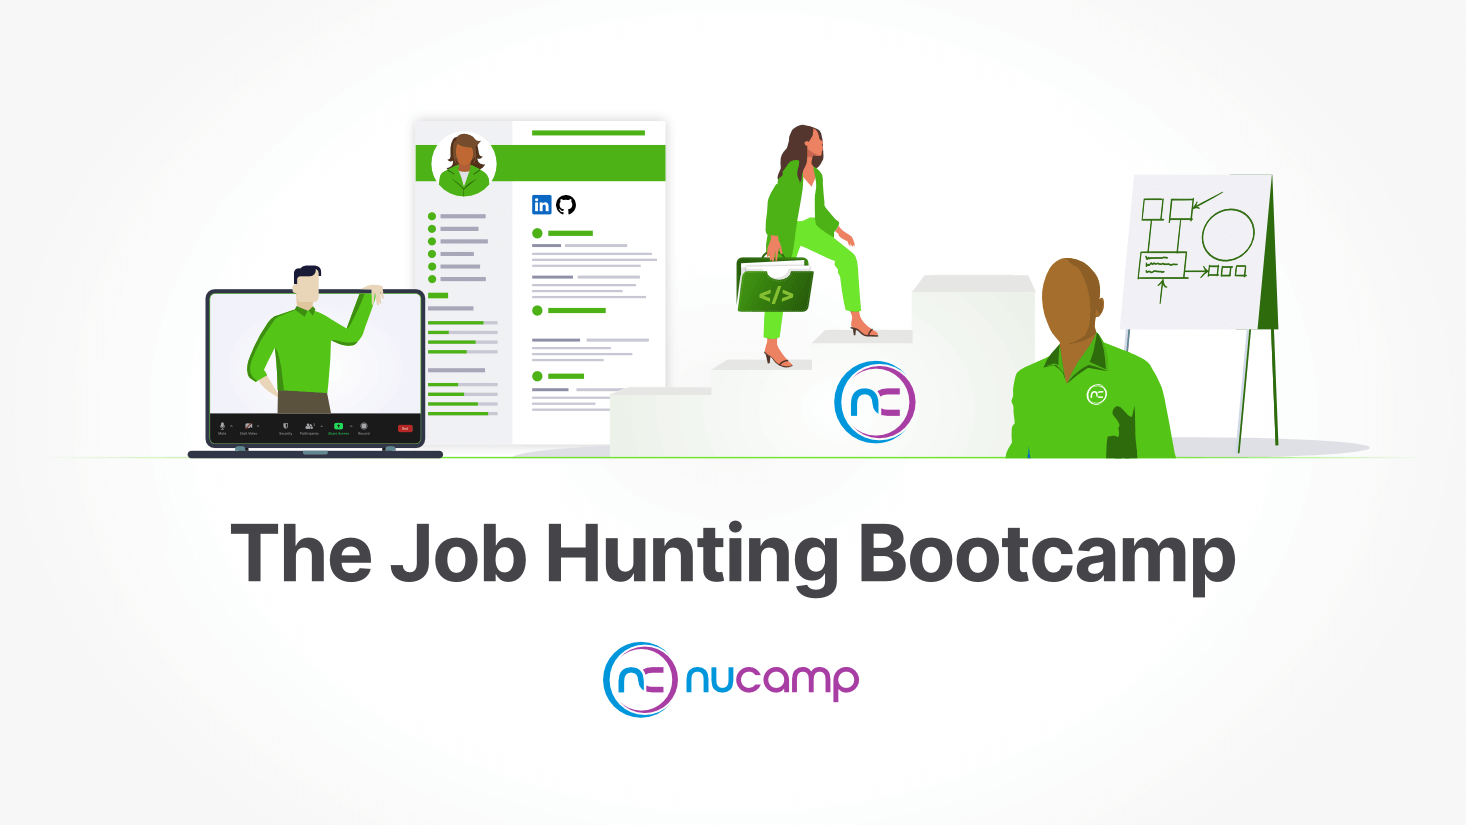 Get a job in tech after a coding bootcamp with the Job Hunting Bootcamp